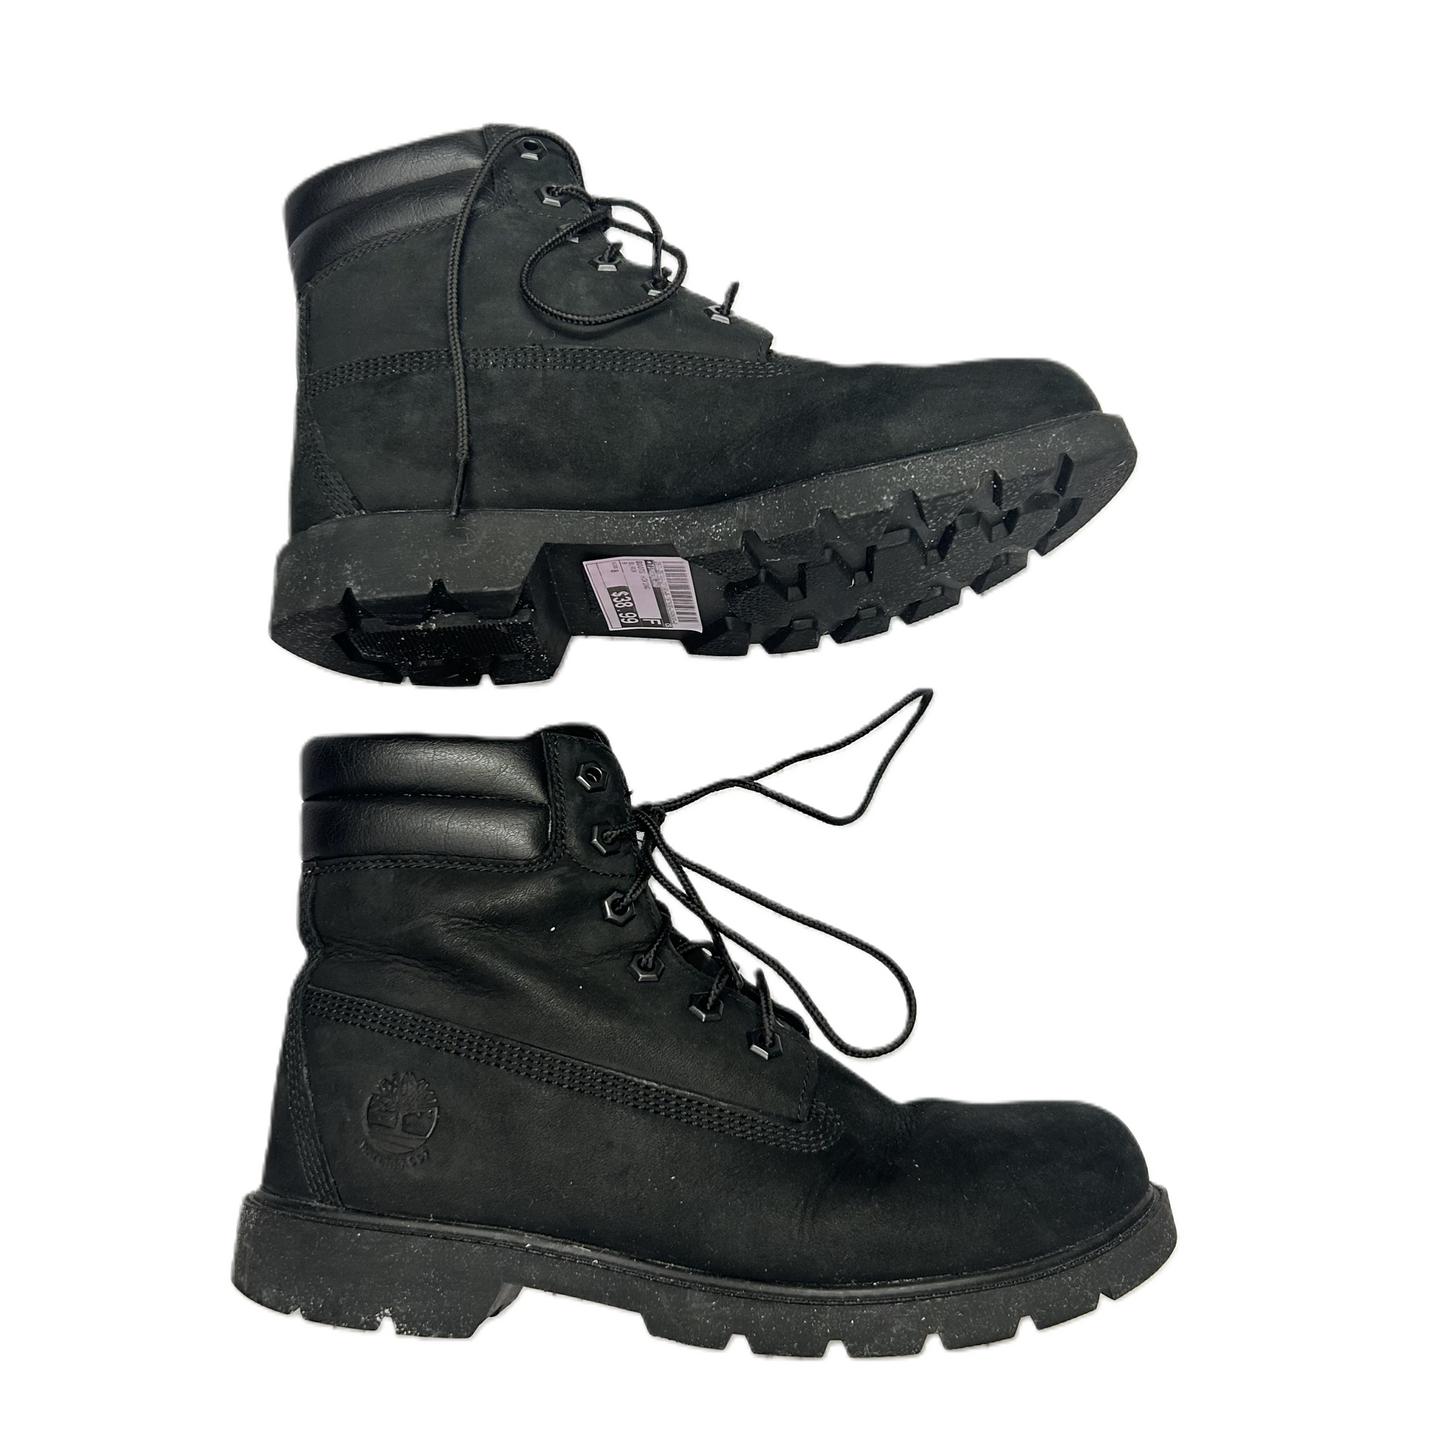 Black Boots Hiking By Timberland, Size: 8